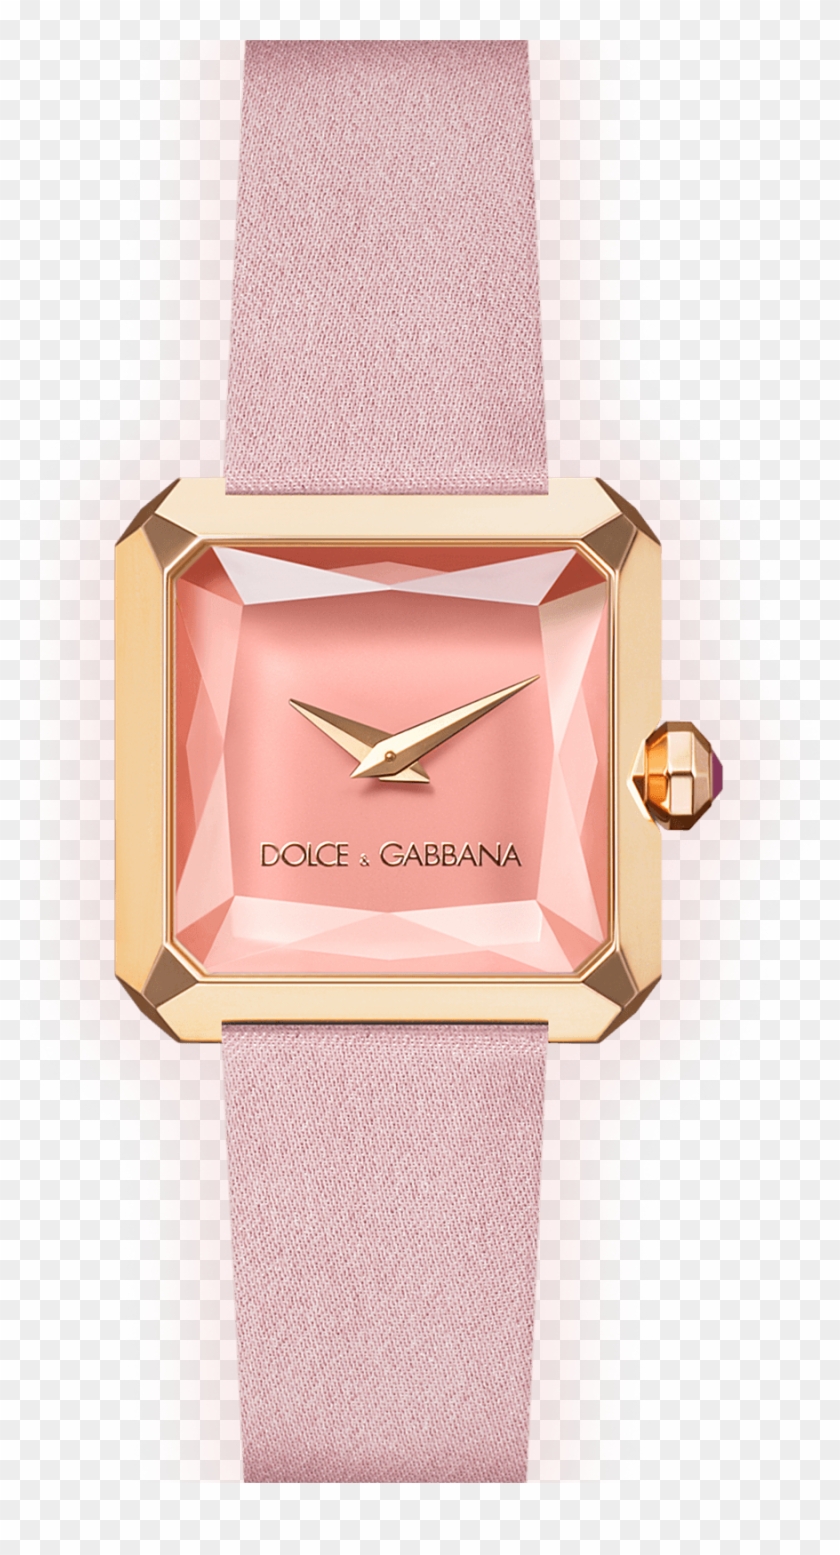 Men's And Women's Luxury Watches Collection - Dolce And Gabbana Pink Watch Clipart #3862047